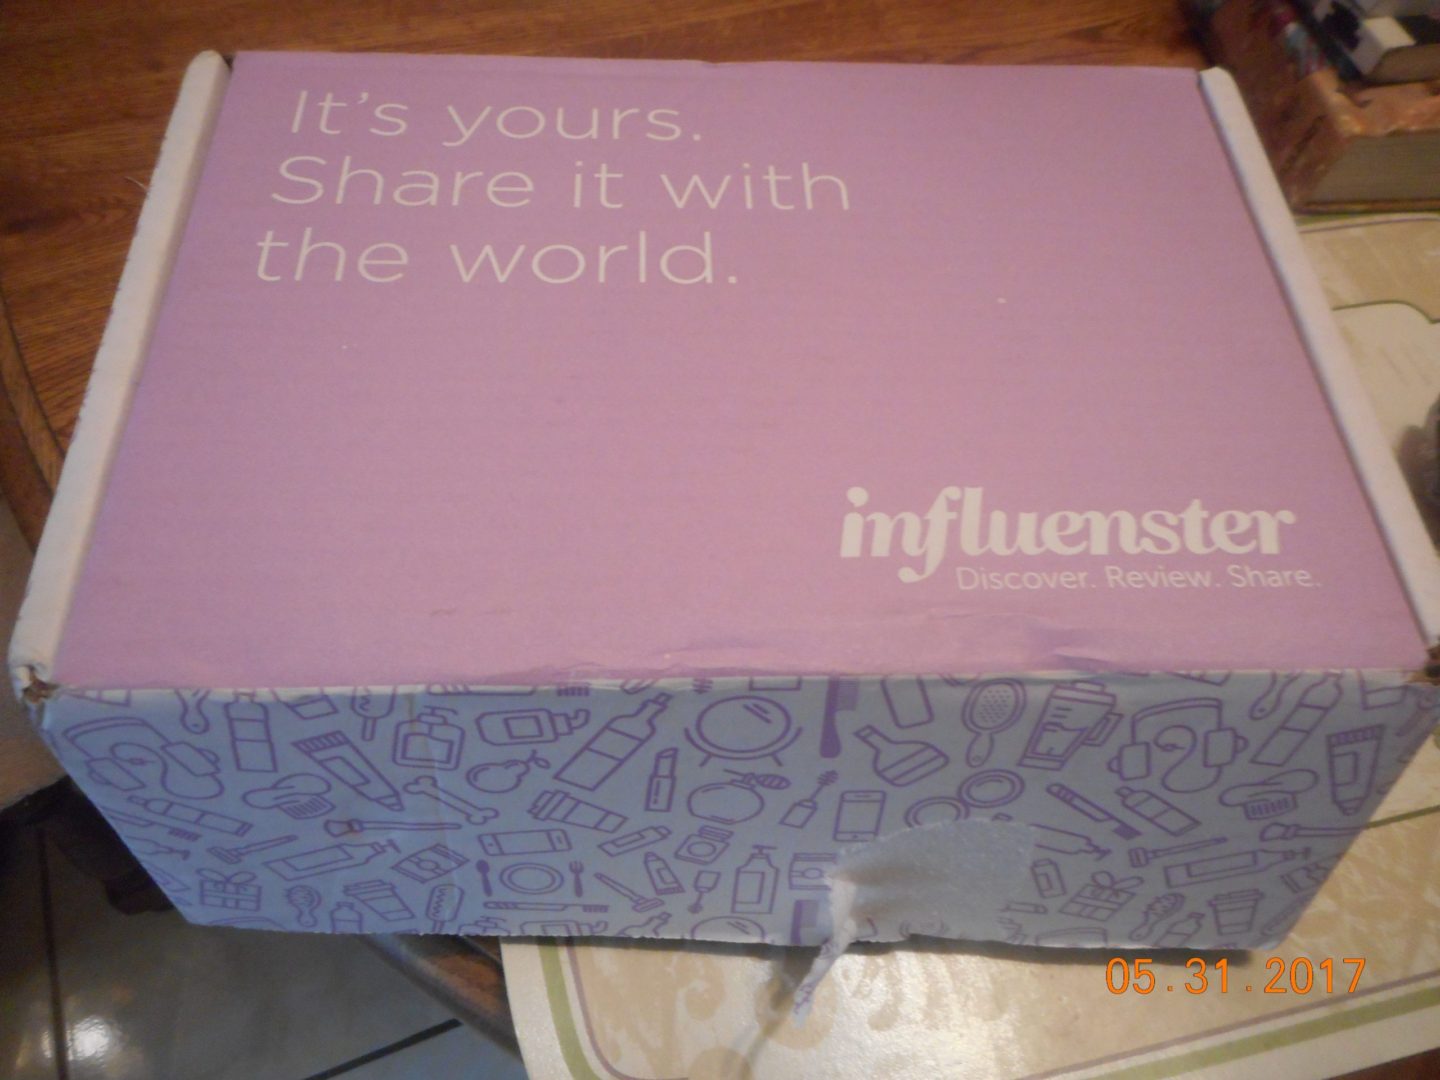 Influenster box caption on box it's yours,. Share it with the world Influenser discover review share